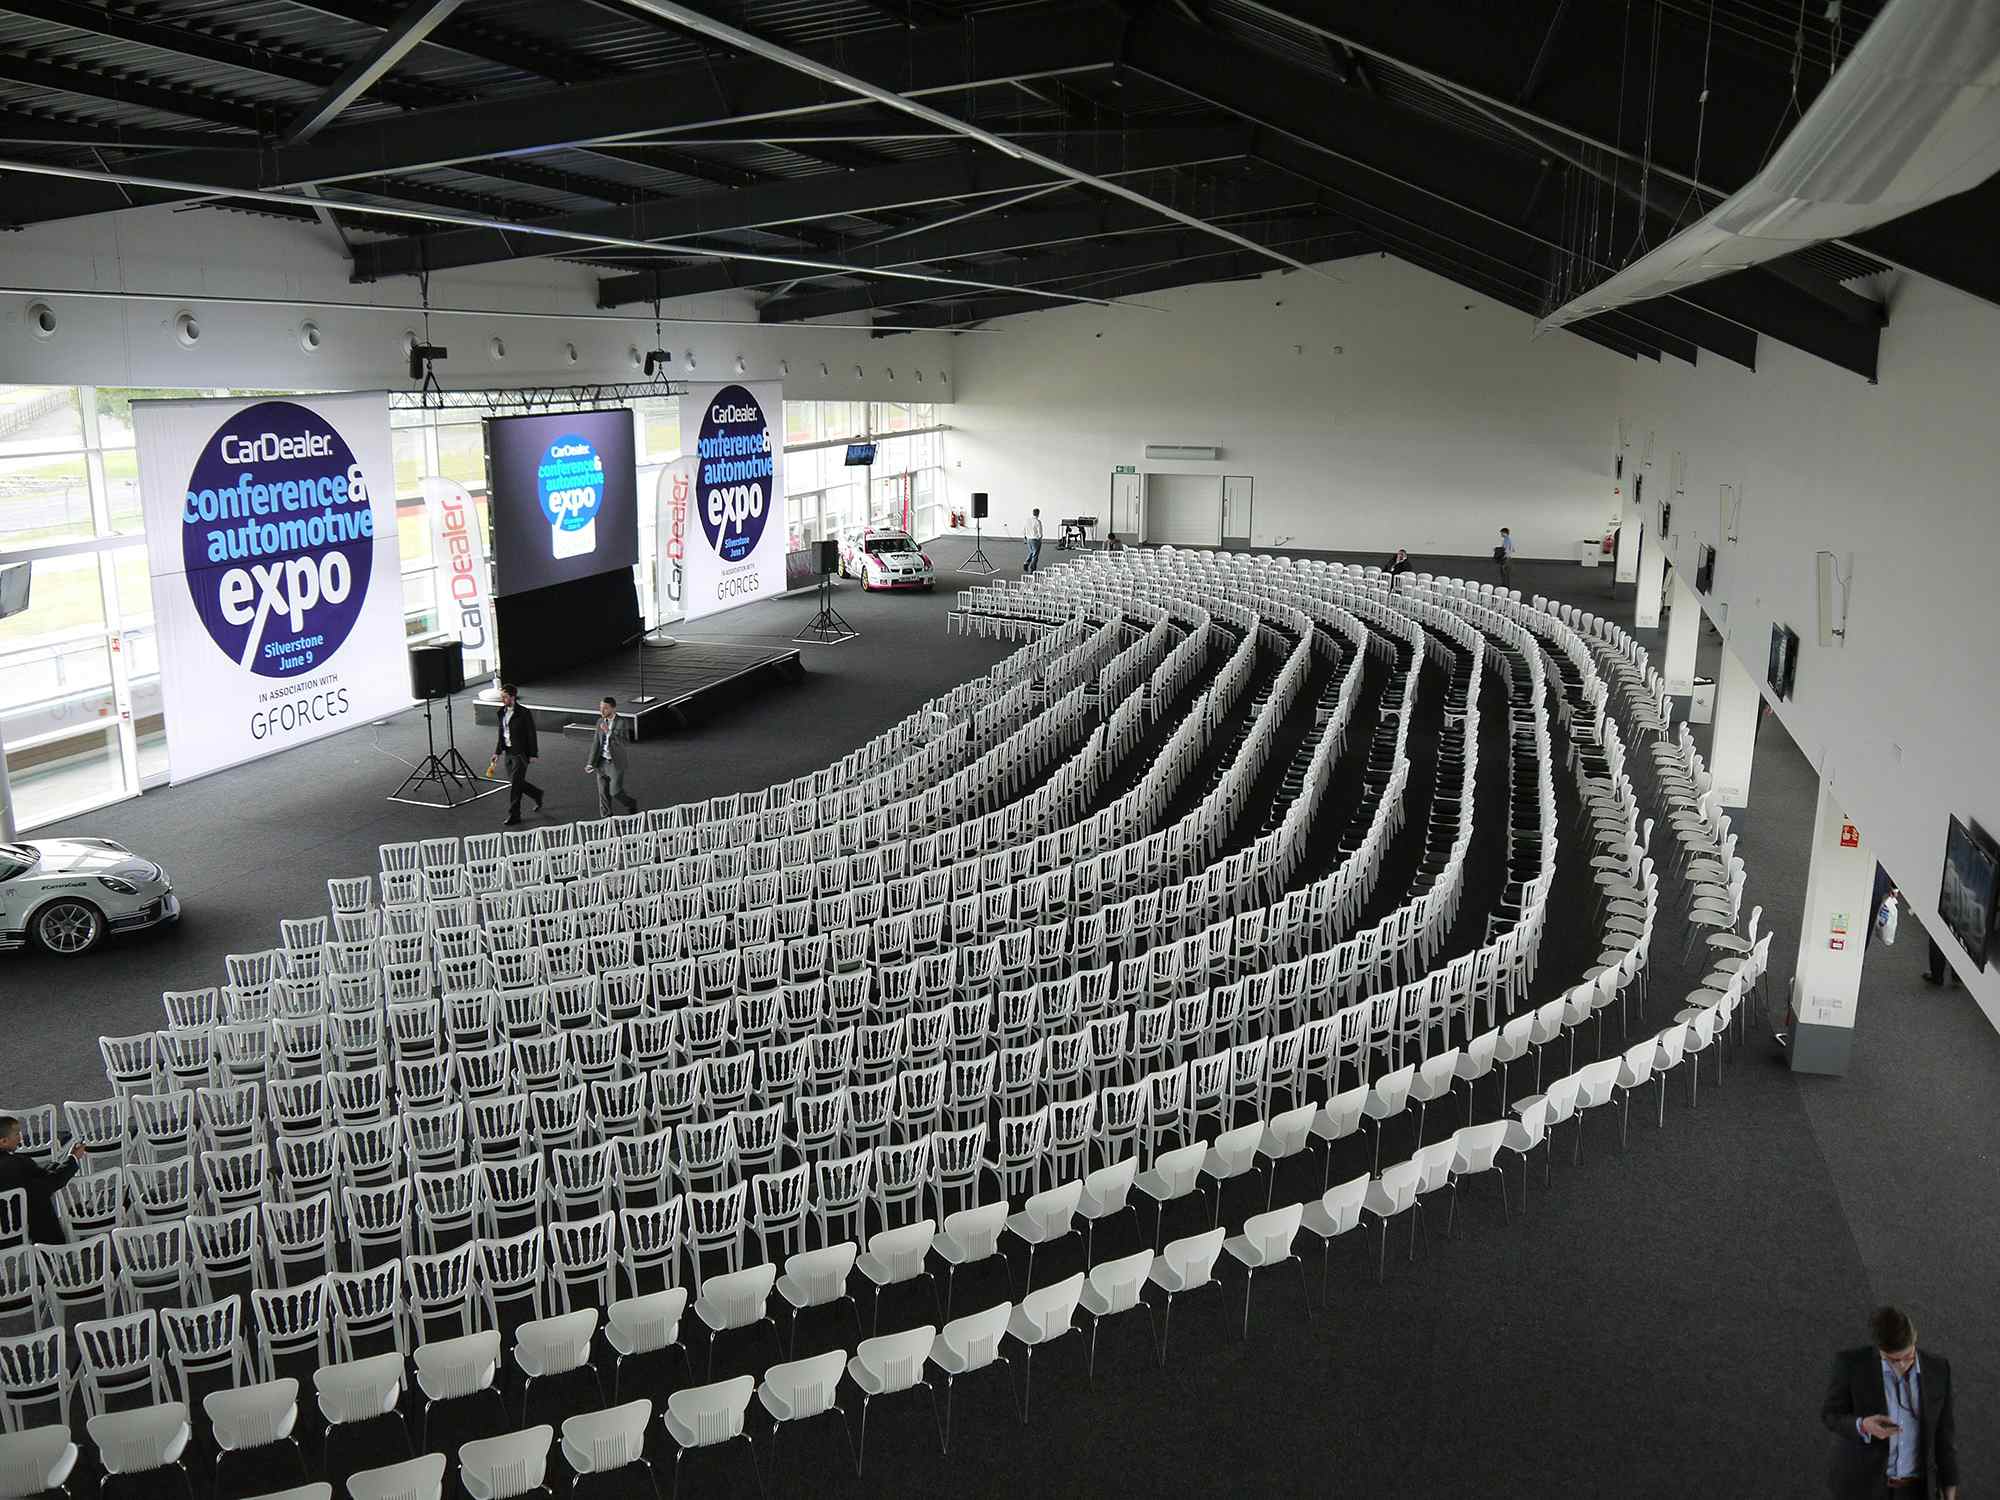 Hall 3, Silverstone International Conference & Exhibition Centre